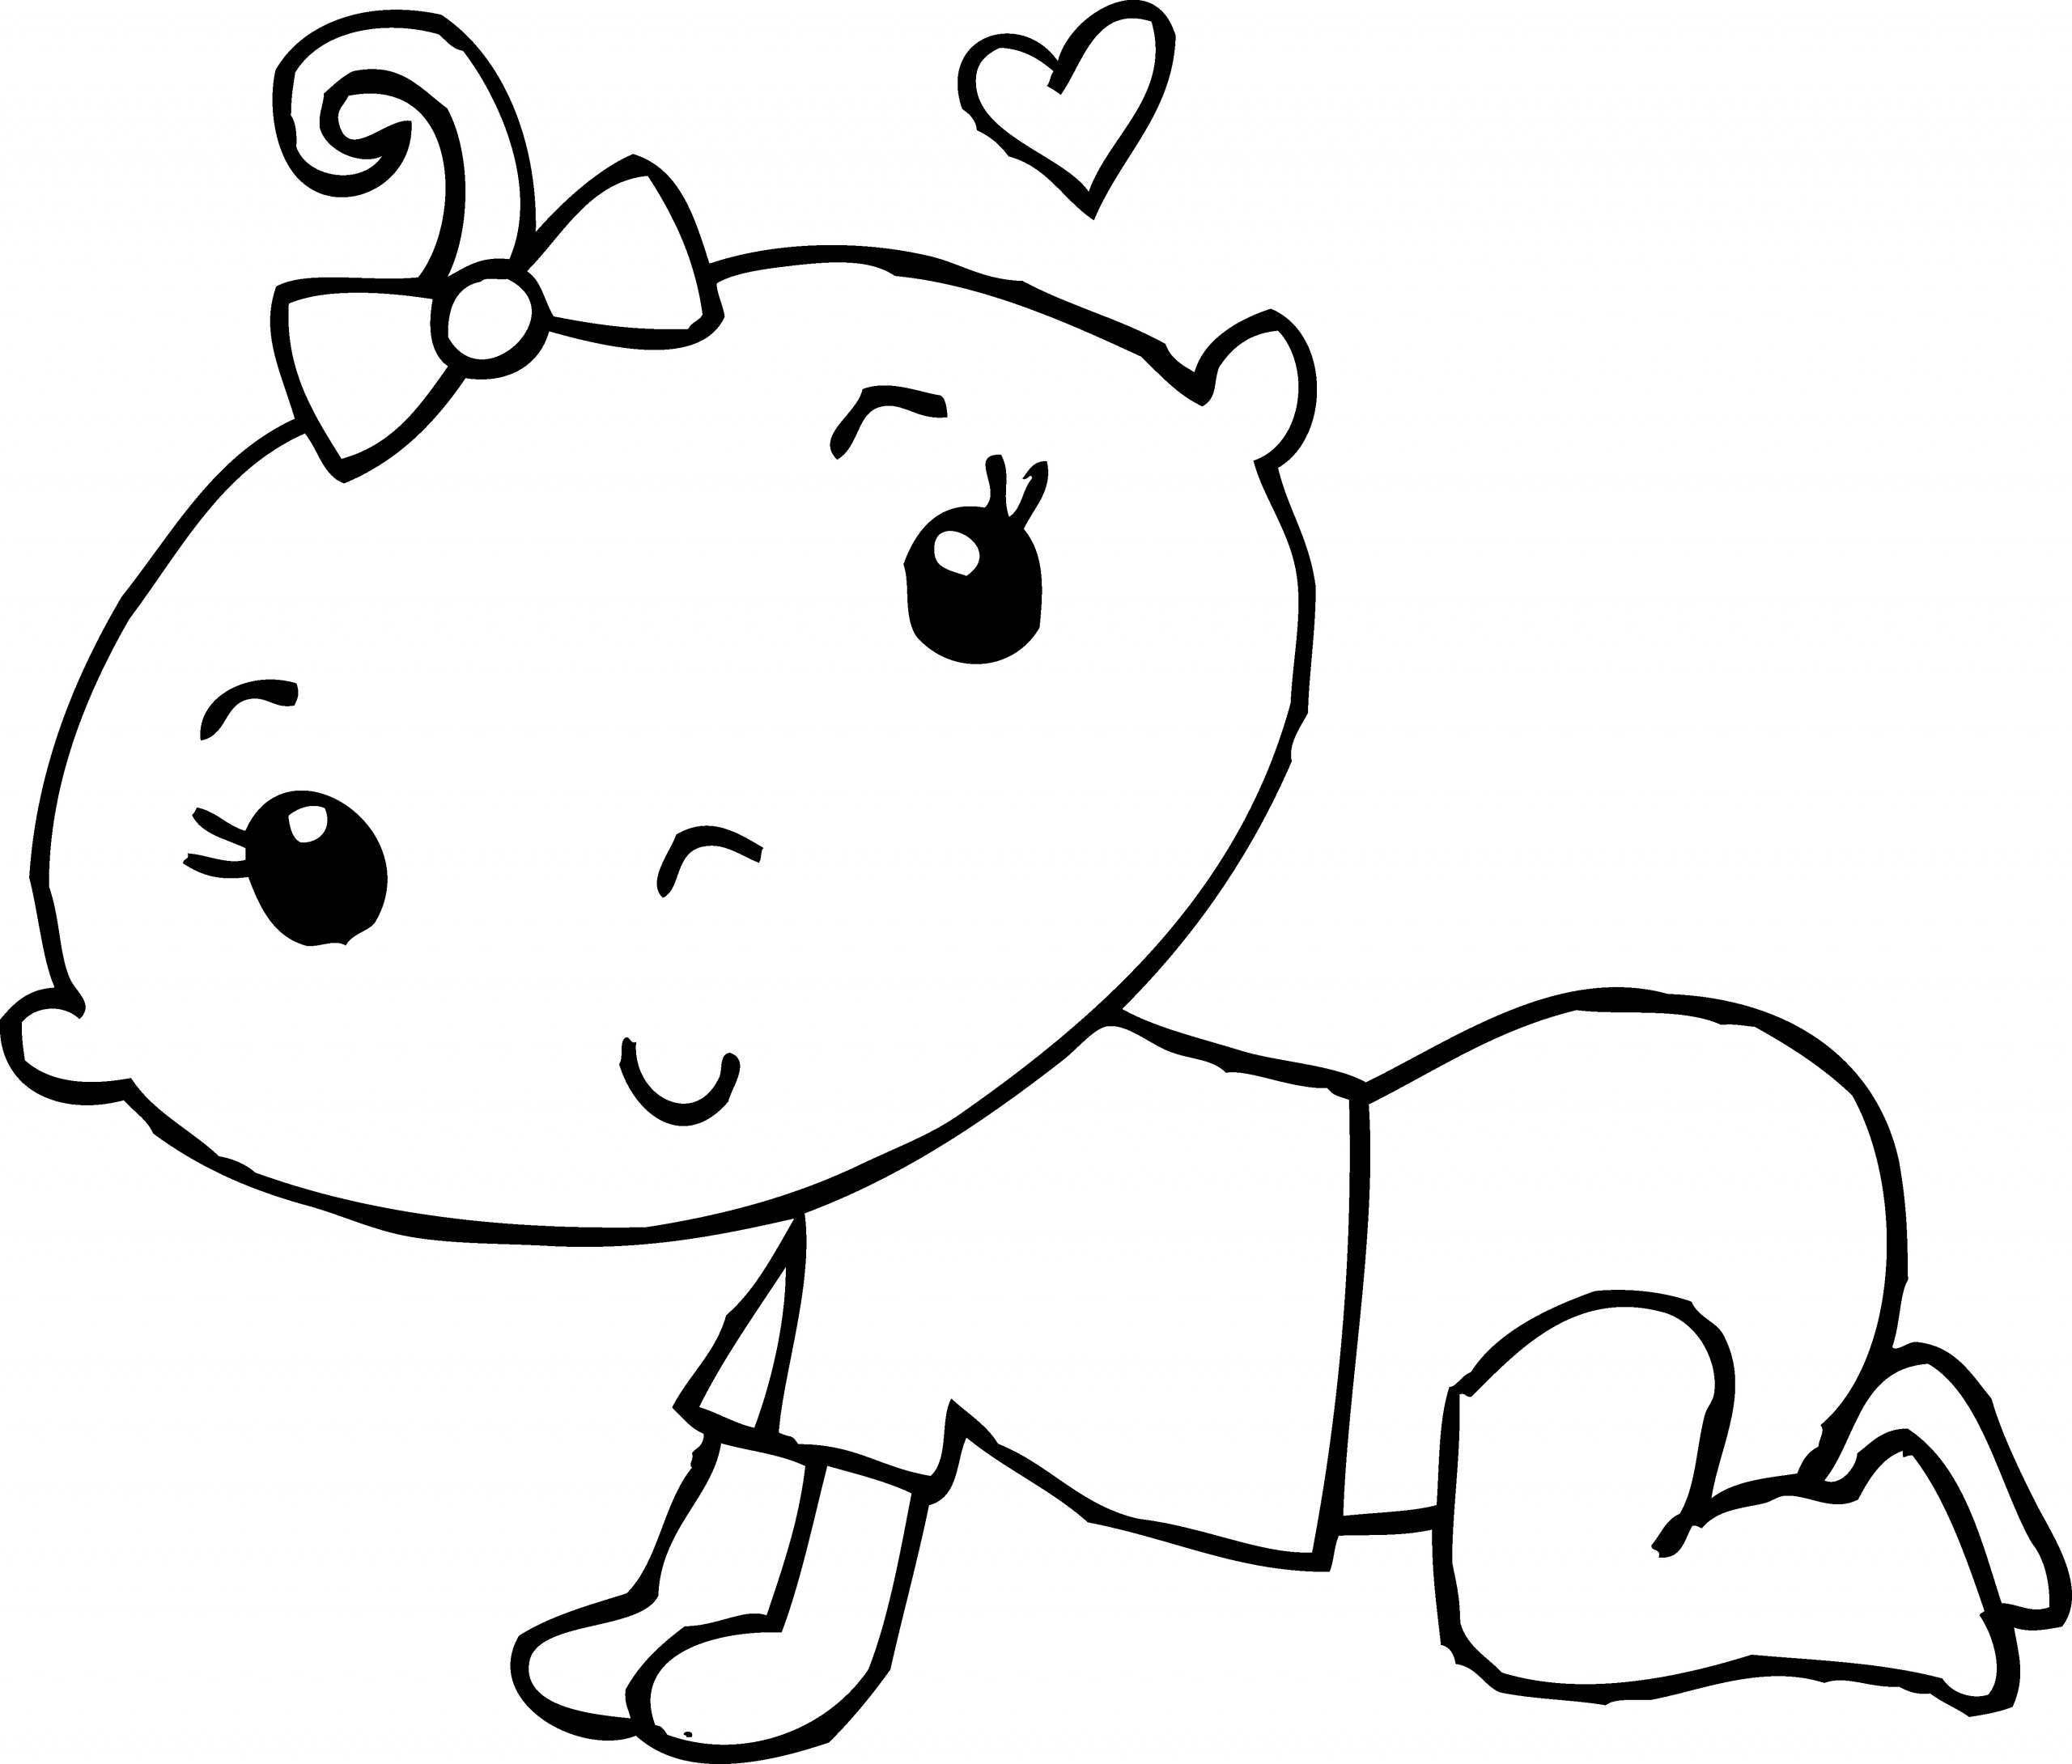 Baby Girl Coloring Page
 Cute Baby Girl Coloring Page Free Clip Art